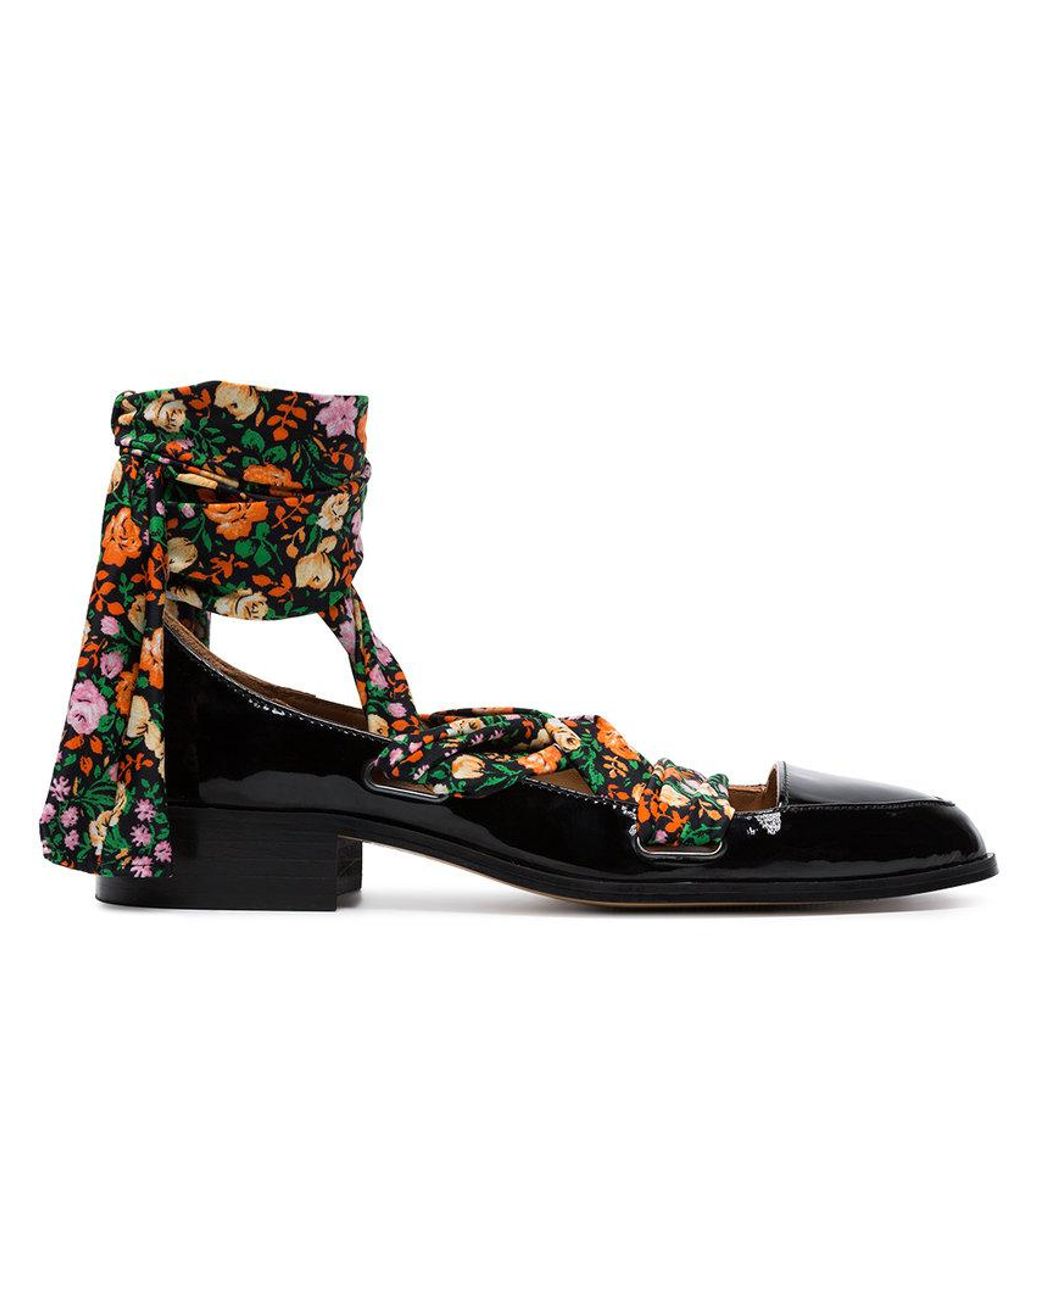 Lilou Patent Floral Ballet Shoes in Black | Lyst Canada